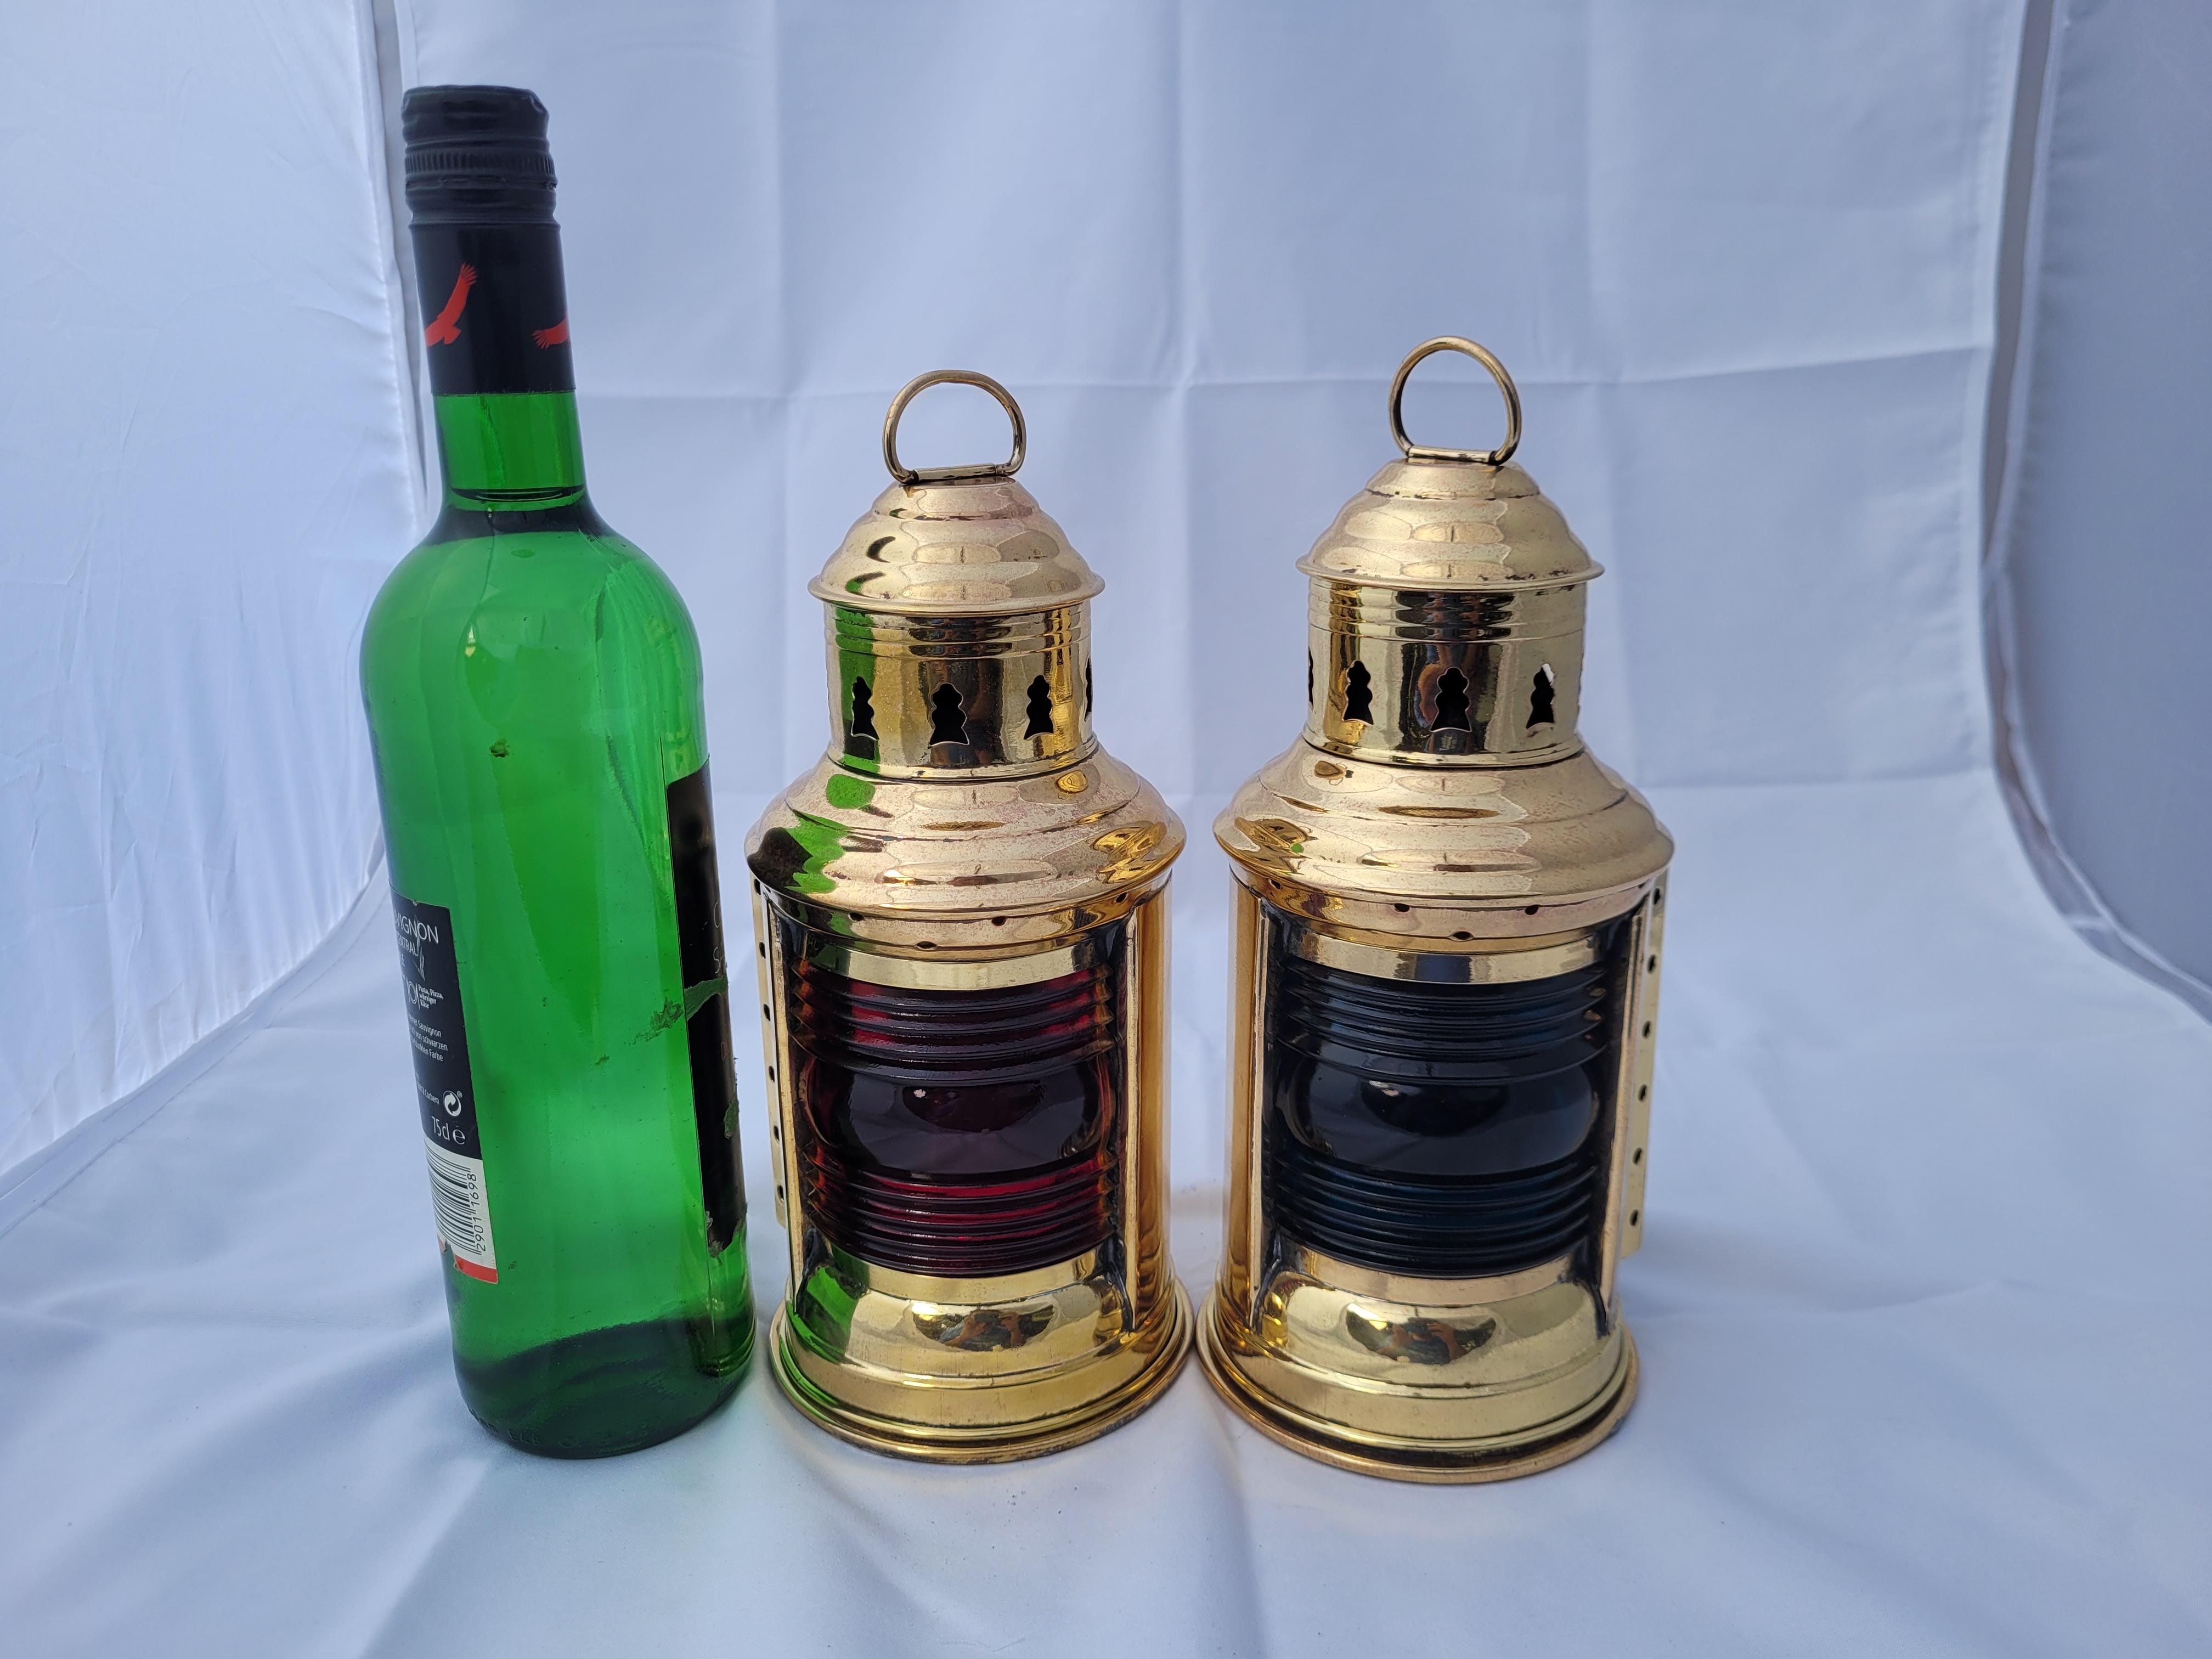 Pair of Brass yacht lanterns with highly polished and lacquered finish. Vented tops with carry rings. Oil Burners inside. With red and blue Fresnel Lenses, manufactured by Perkins.

Weight: 2 lbs.
Overall Dimensions: 10